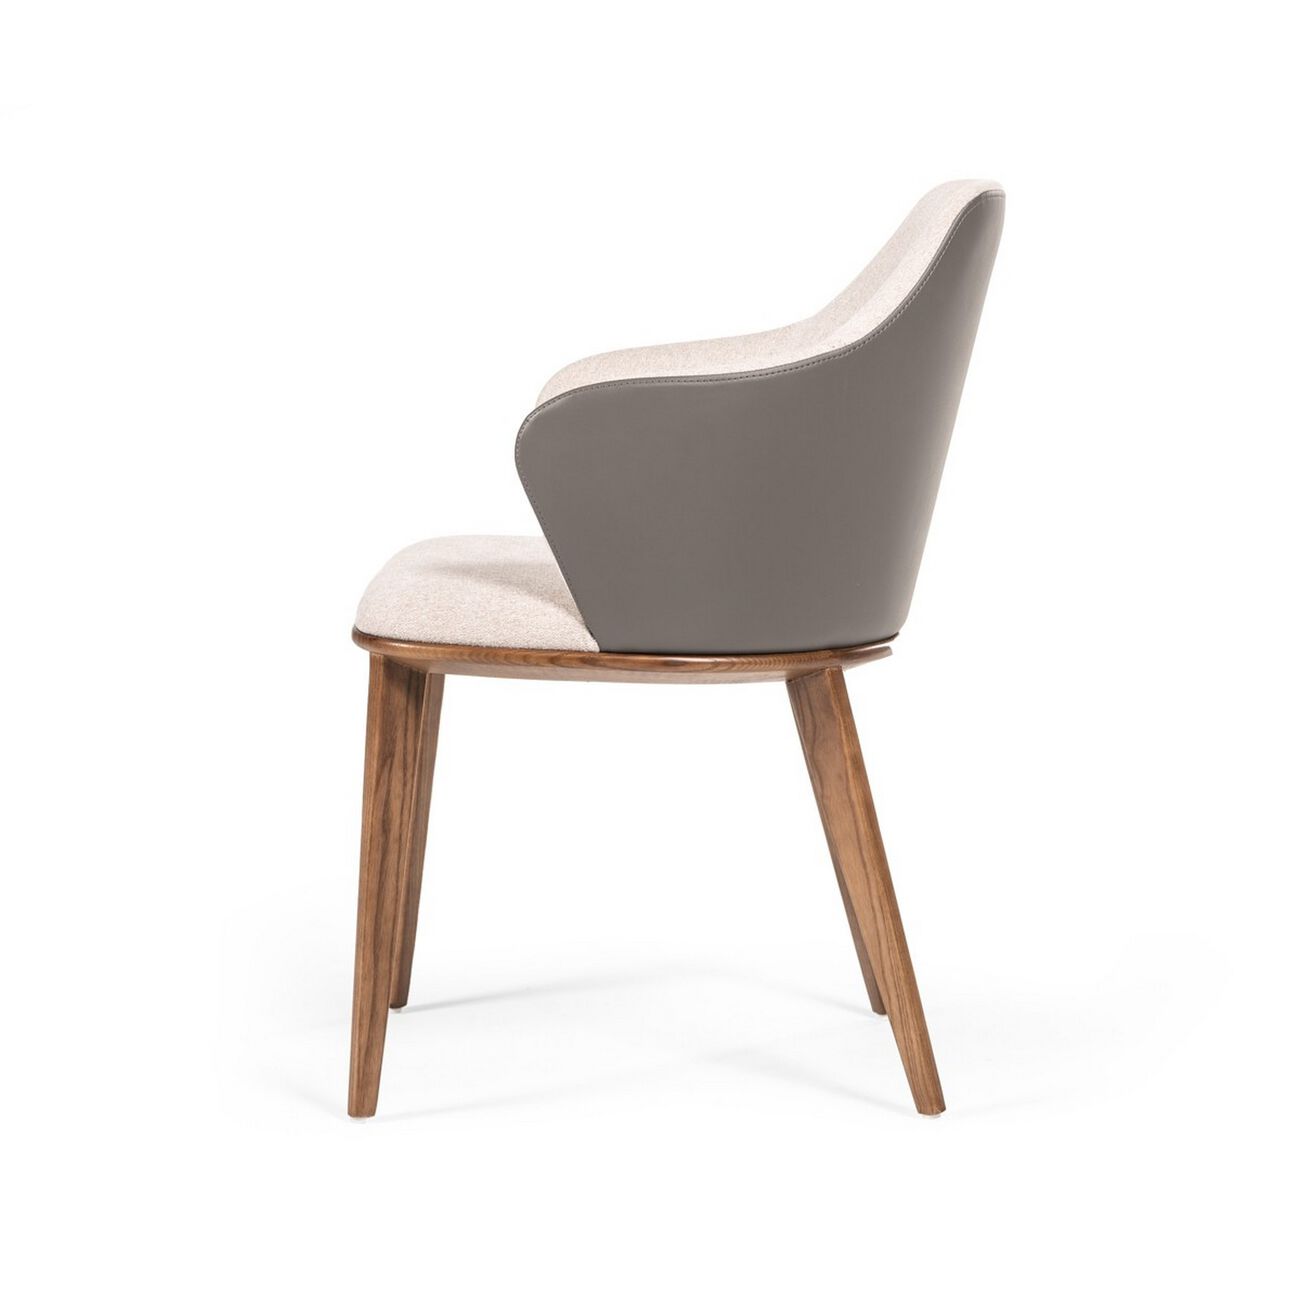 Fabric and Leatherette Dining Chair with Wooden Legs, Beige and Gray